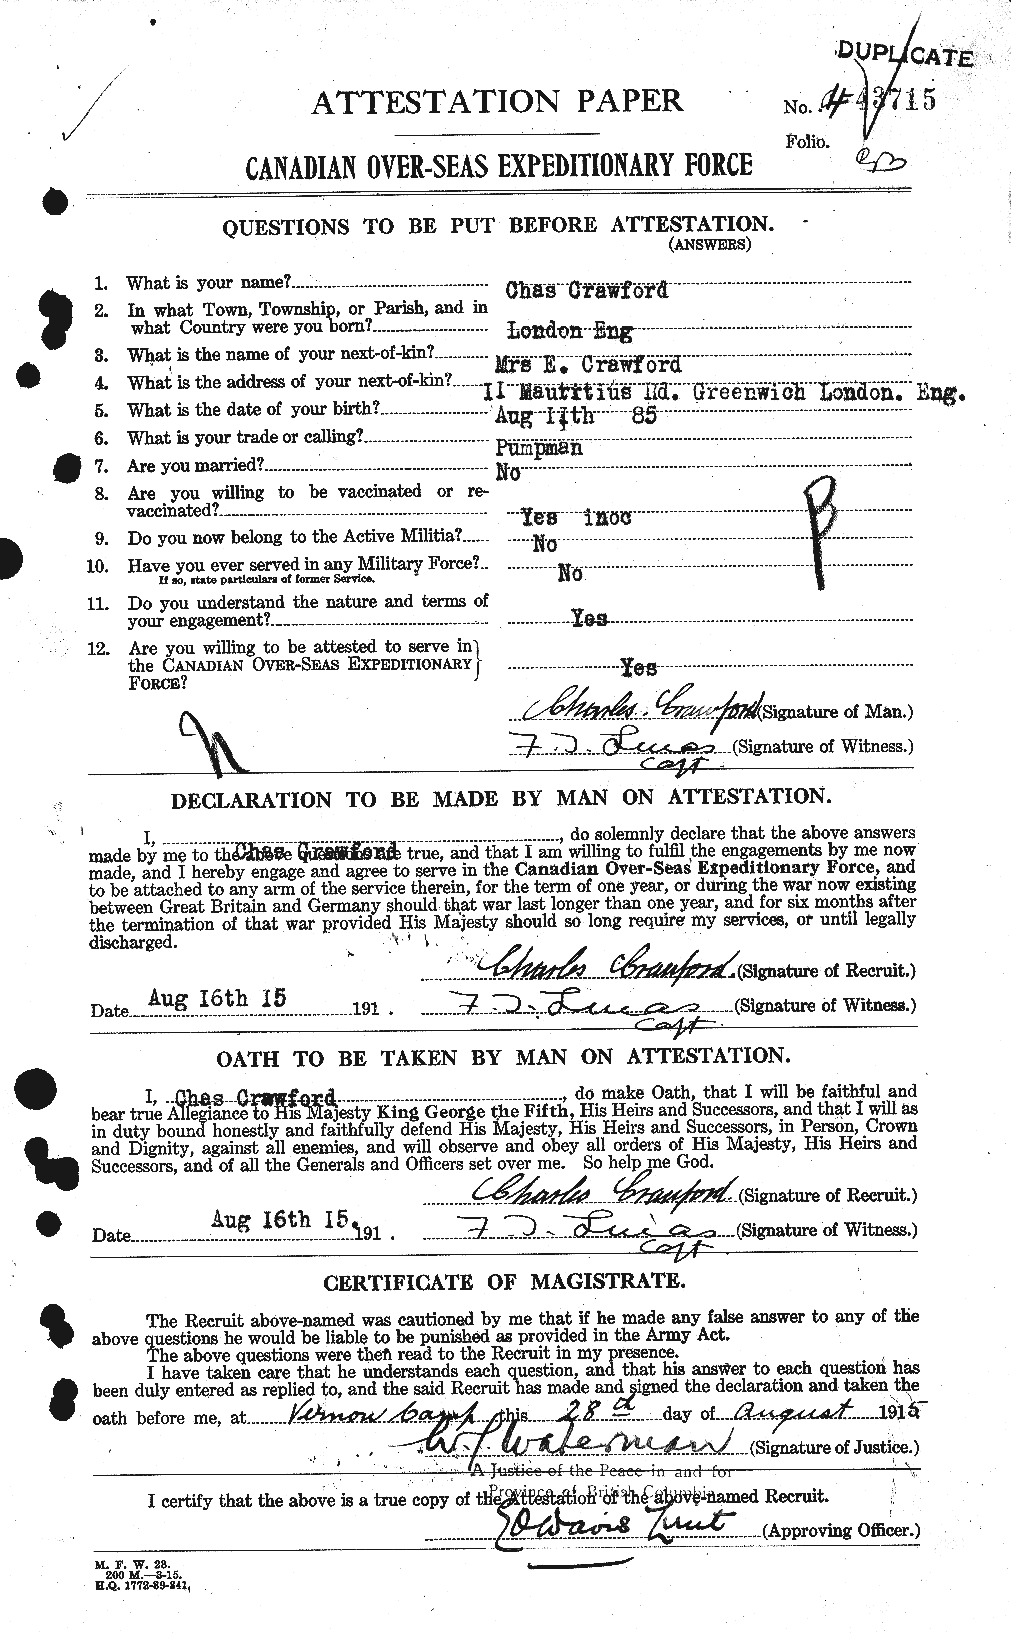 Personnel Records of the First World War - CEF 060854a